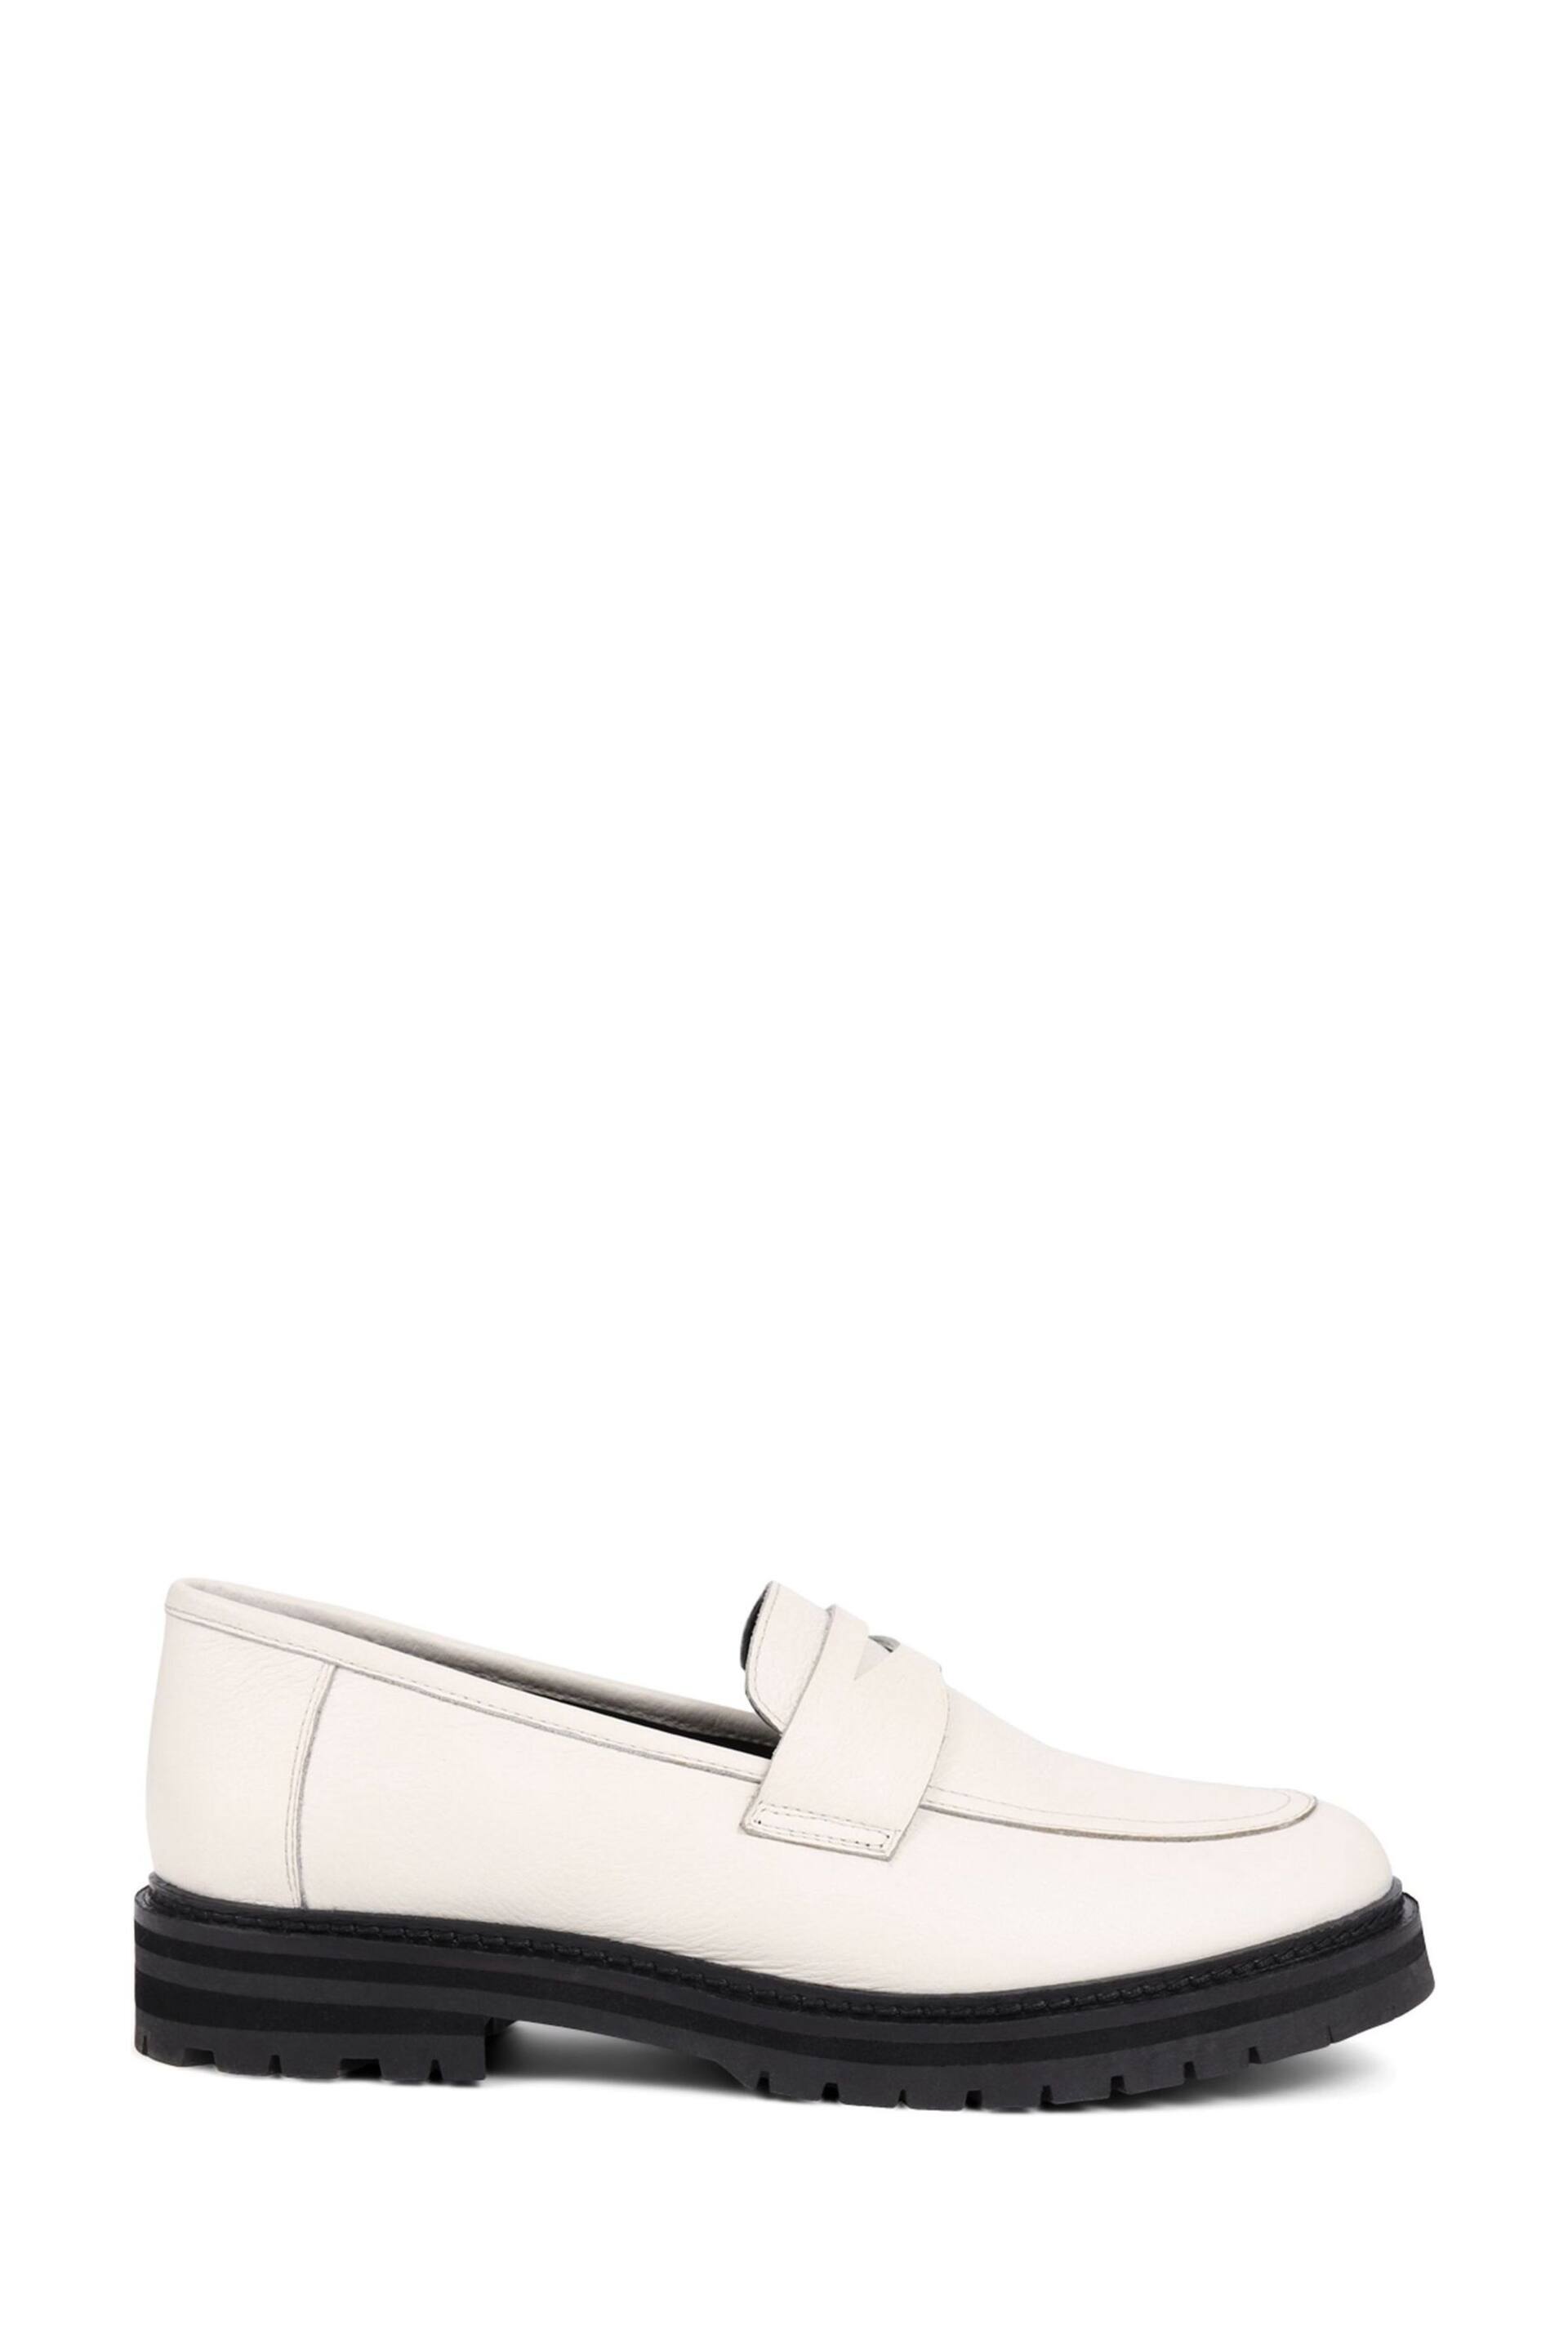 Jones Bootmaker Dara2 Leather White Loafers - Image 1 of 5